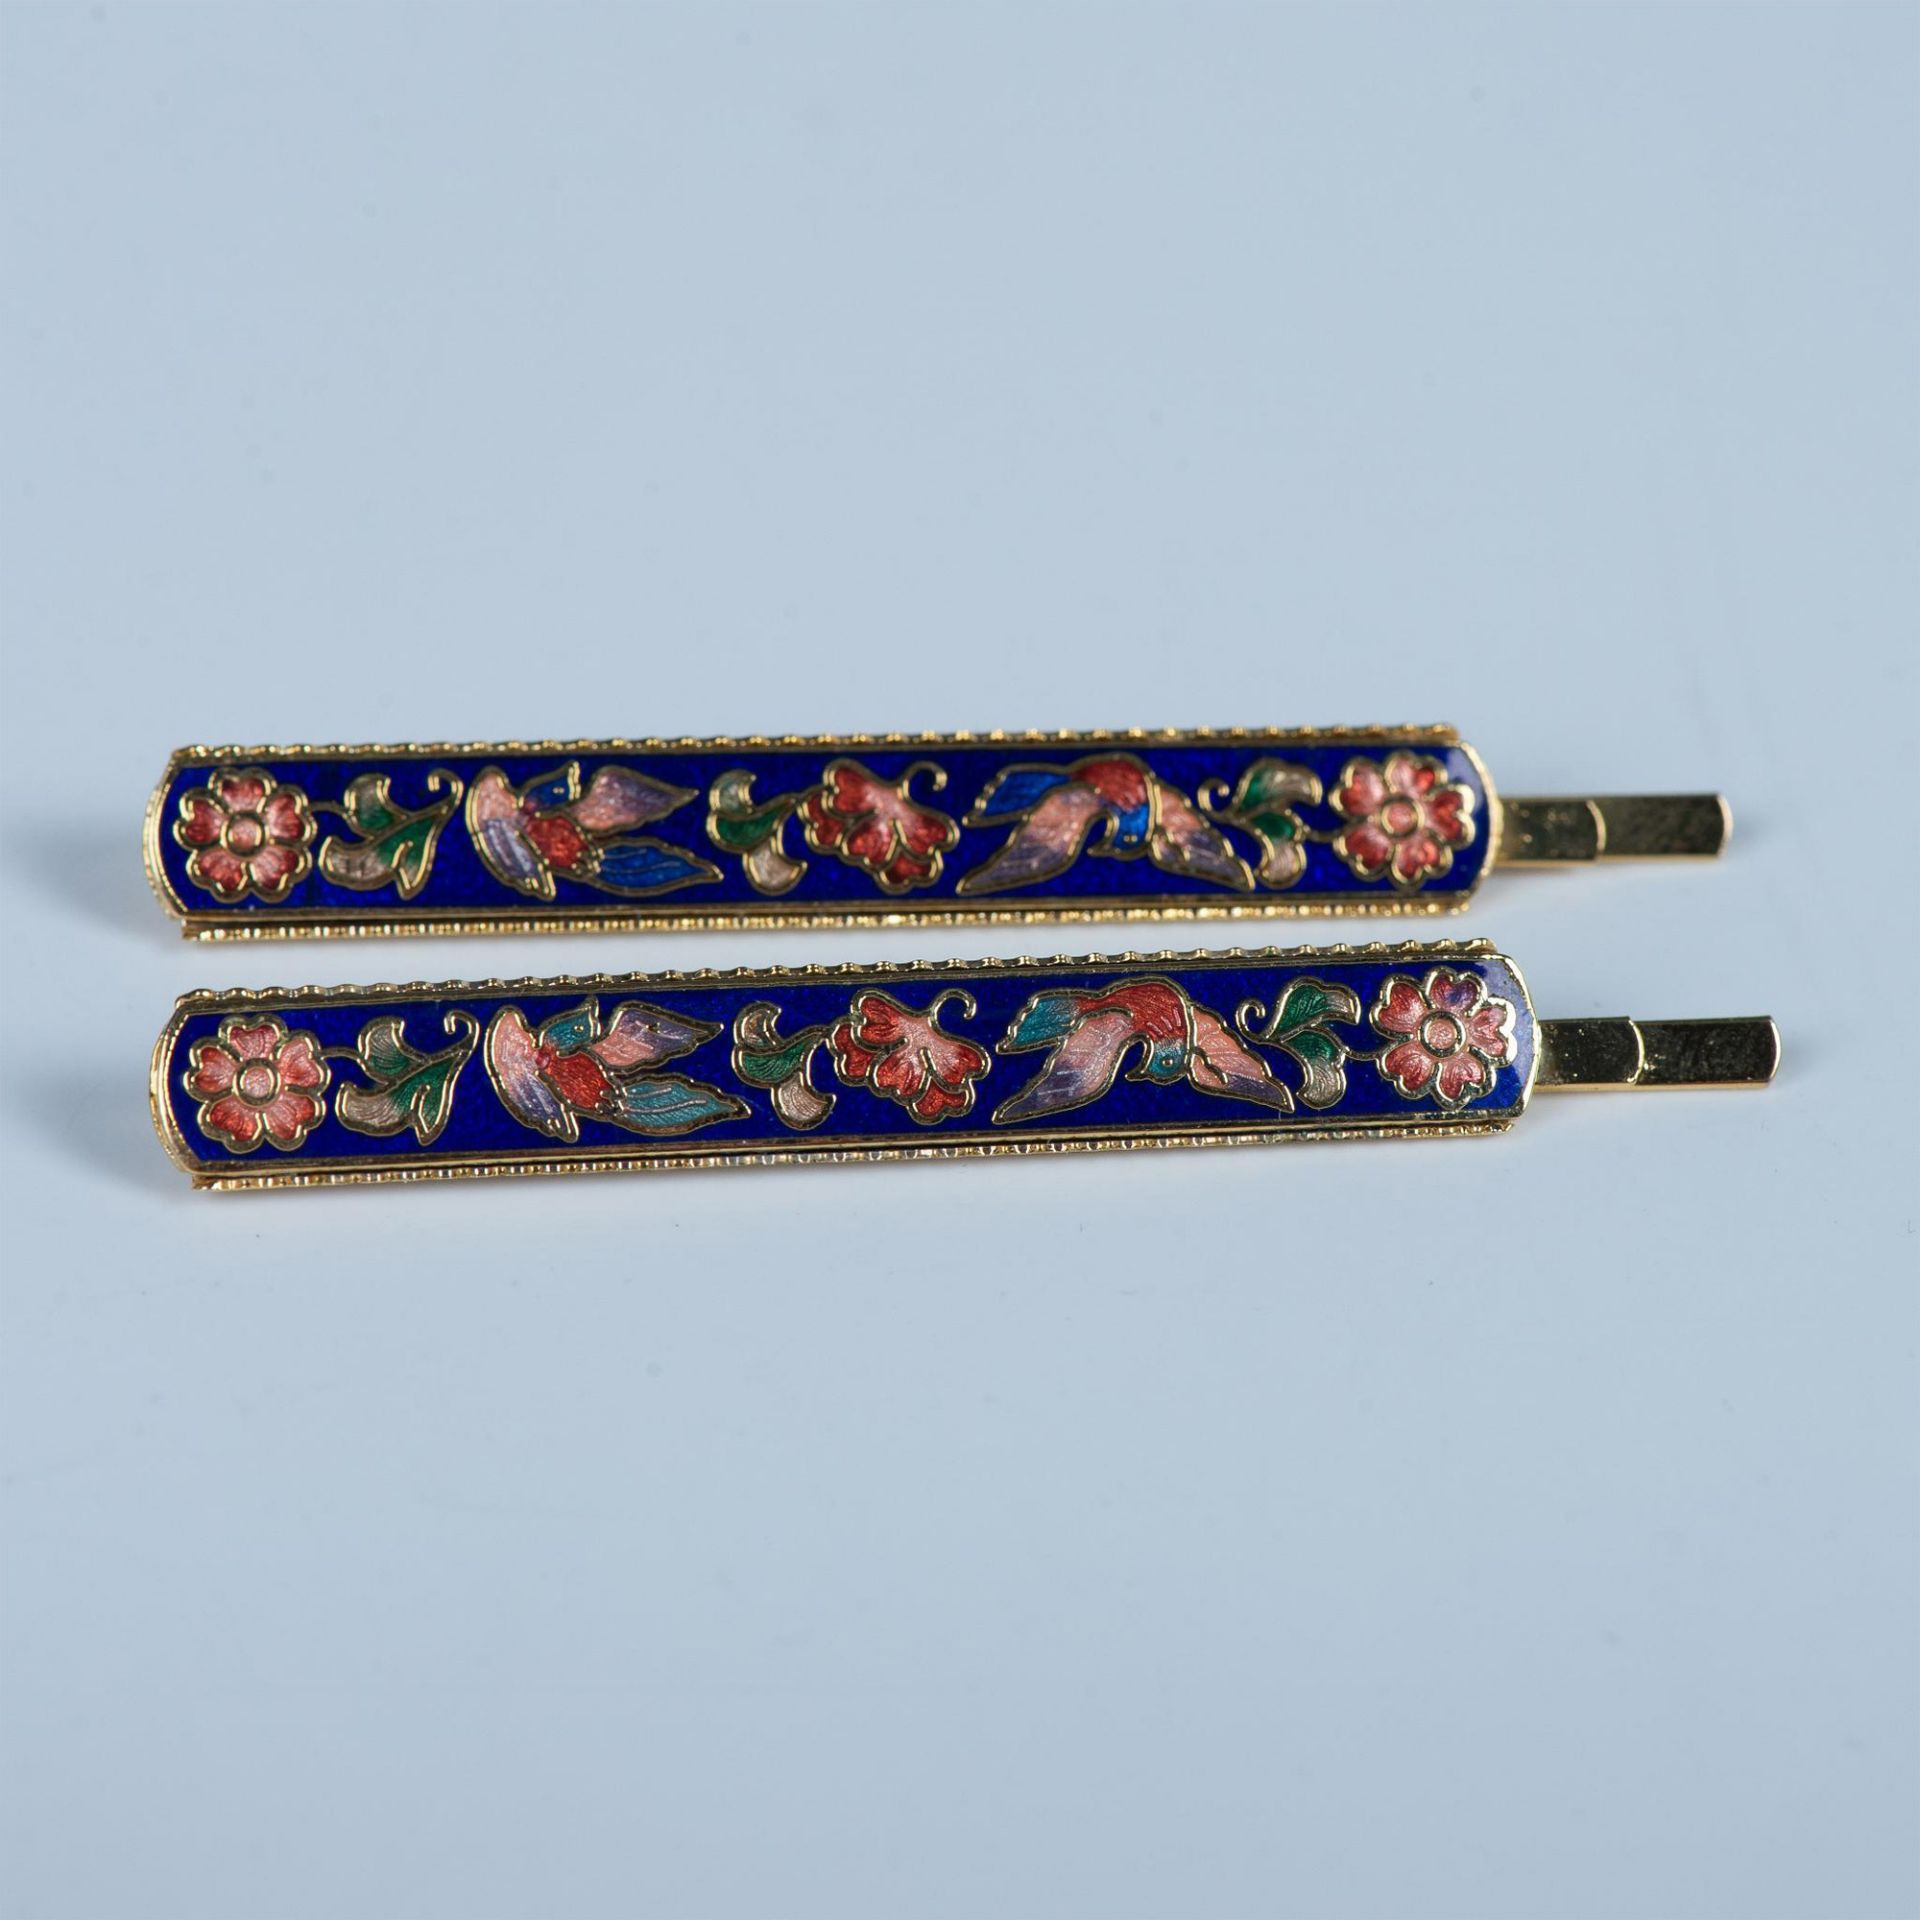 3 Pair of Cloisonne Hair Barrettes - Image 6 of 6